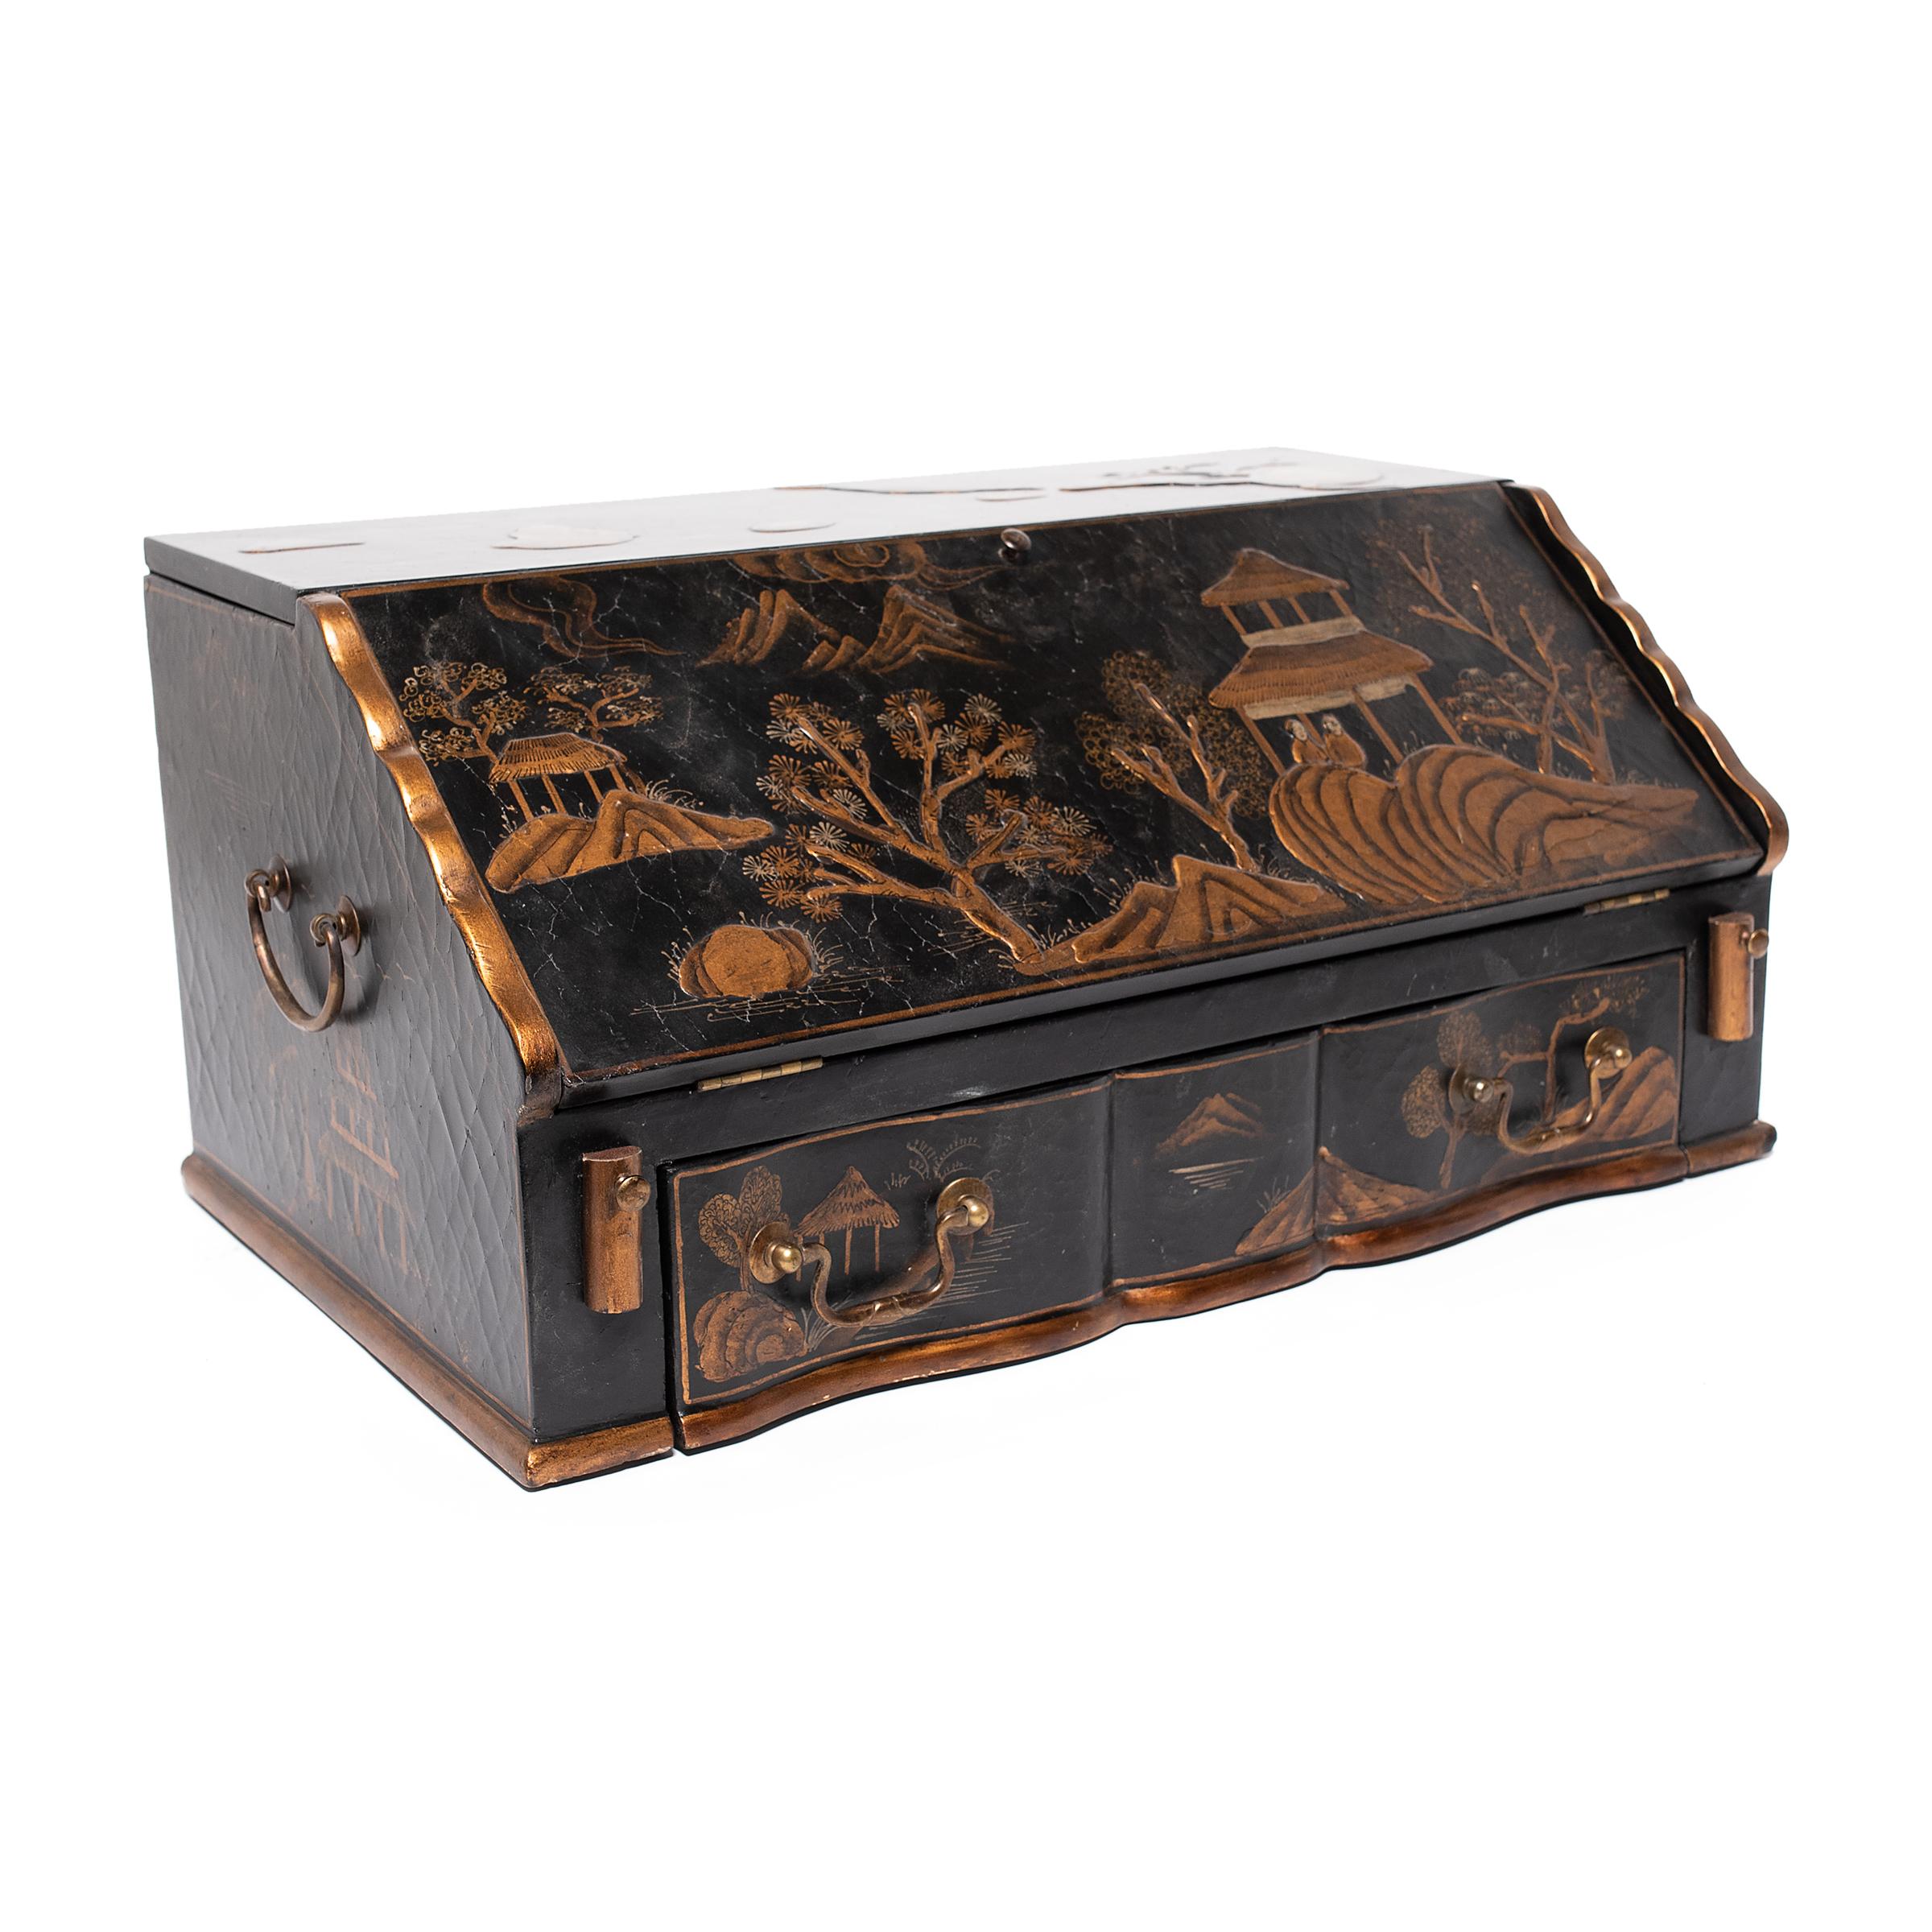 This charming tabletop secretaire is decorated in gold and black in the Chinoiserie style. The exterior is finished with black lacquer and painted with scenic mountain landscapes, brushed with gilt pigments atop low relief elements. At the base is a